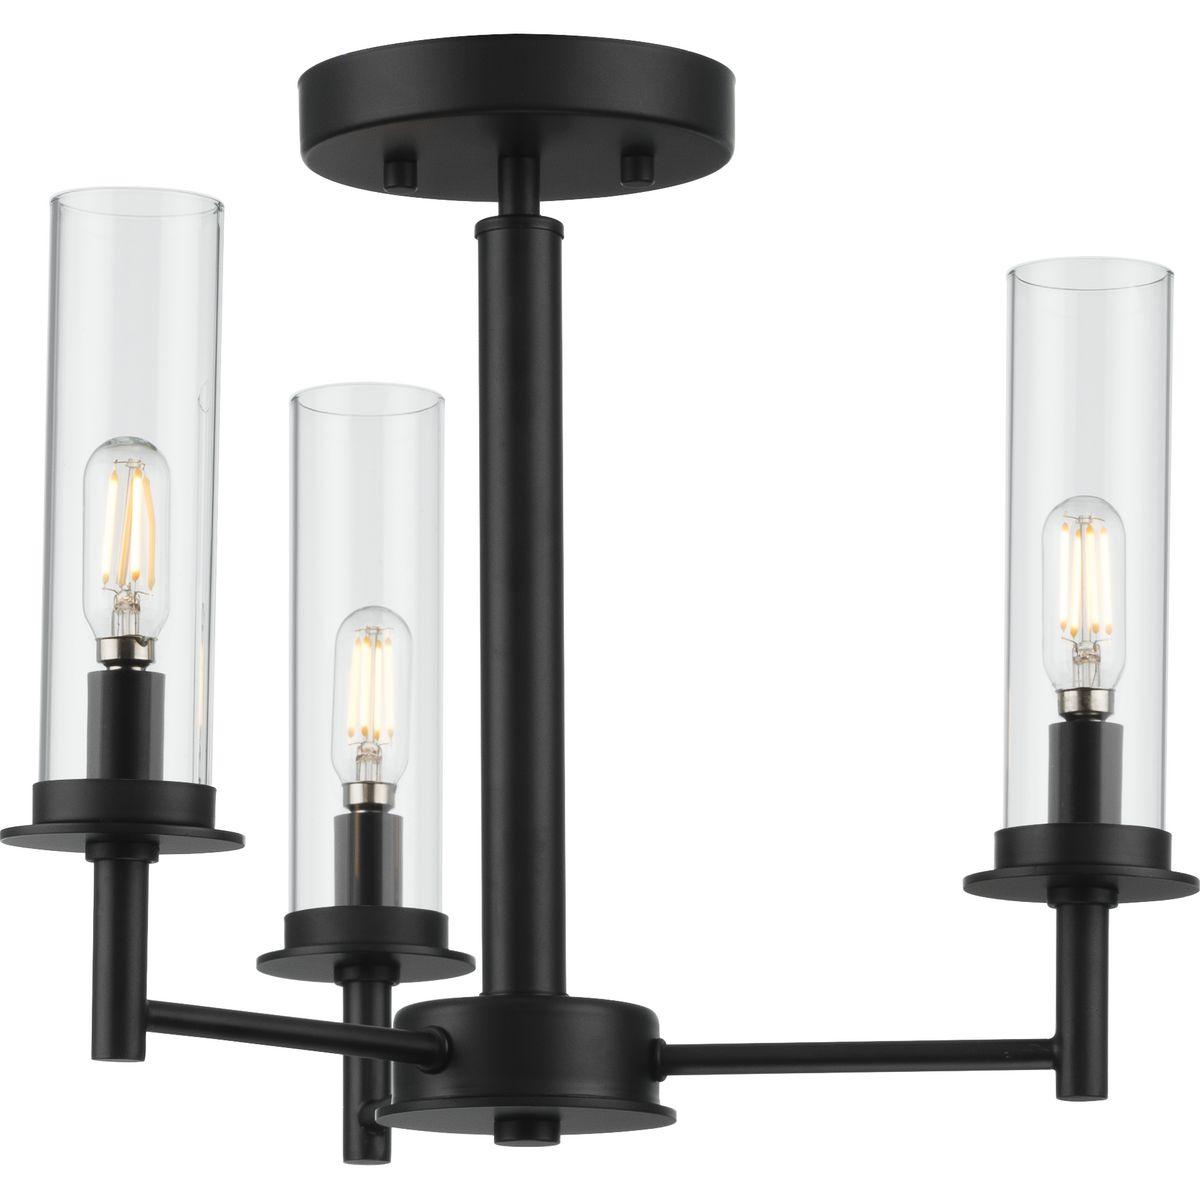 Hubbell P400250-031 Balance the best of modern and traditional with the Kellwyn Collection 3-Light Matte Black Clear Glass Transitional Semi-Flush Mount Convertible Ceiling Light. The classic frame with crisp, clean lines is coated in a beautiful matte black finish. Light so